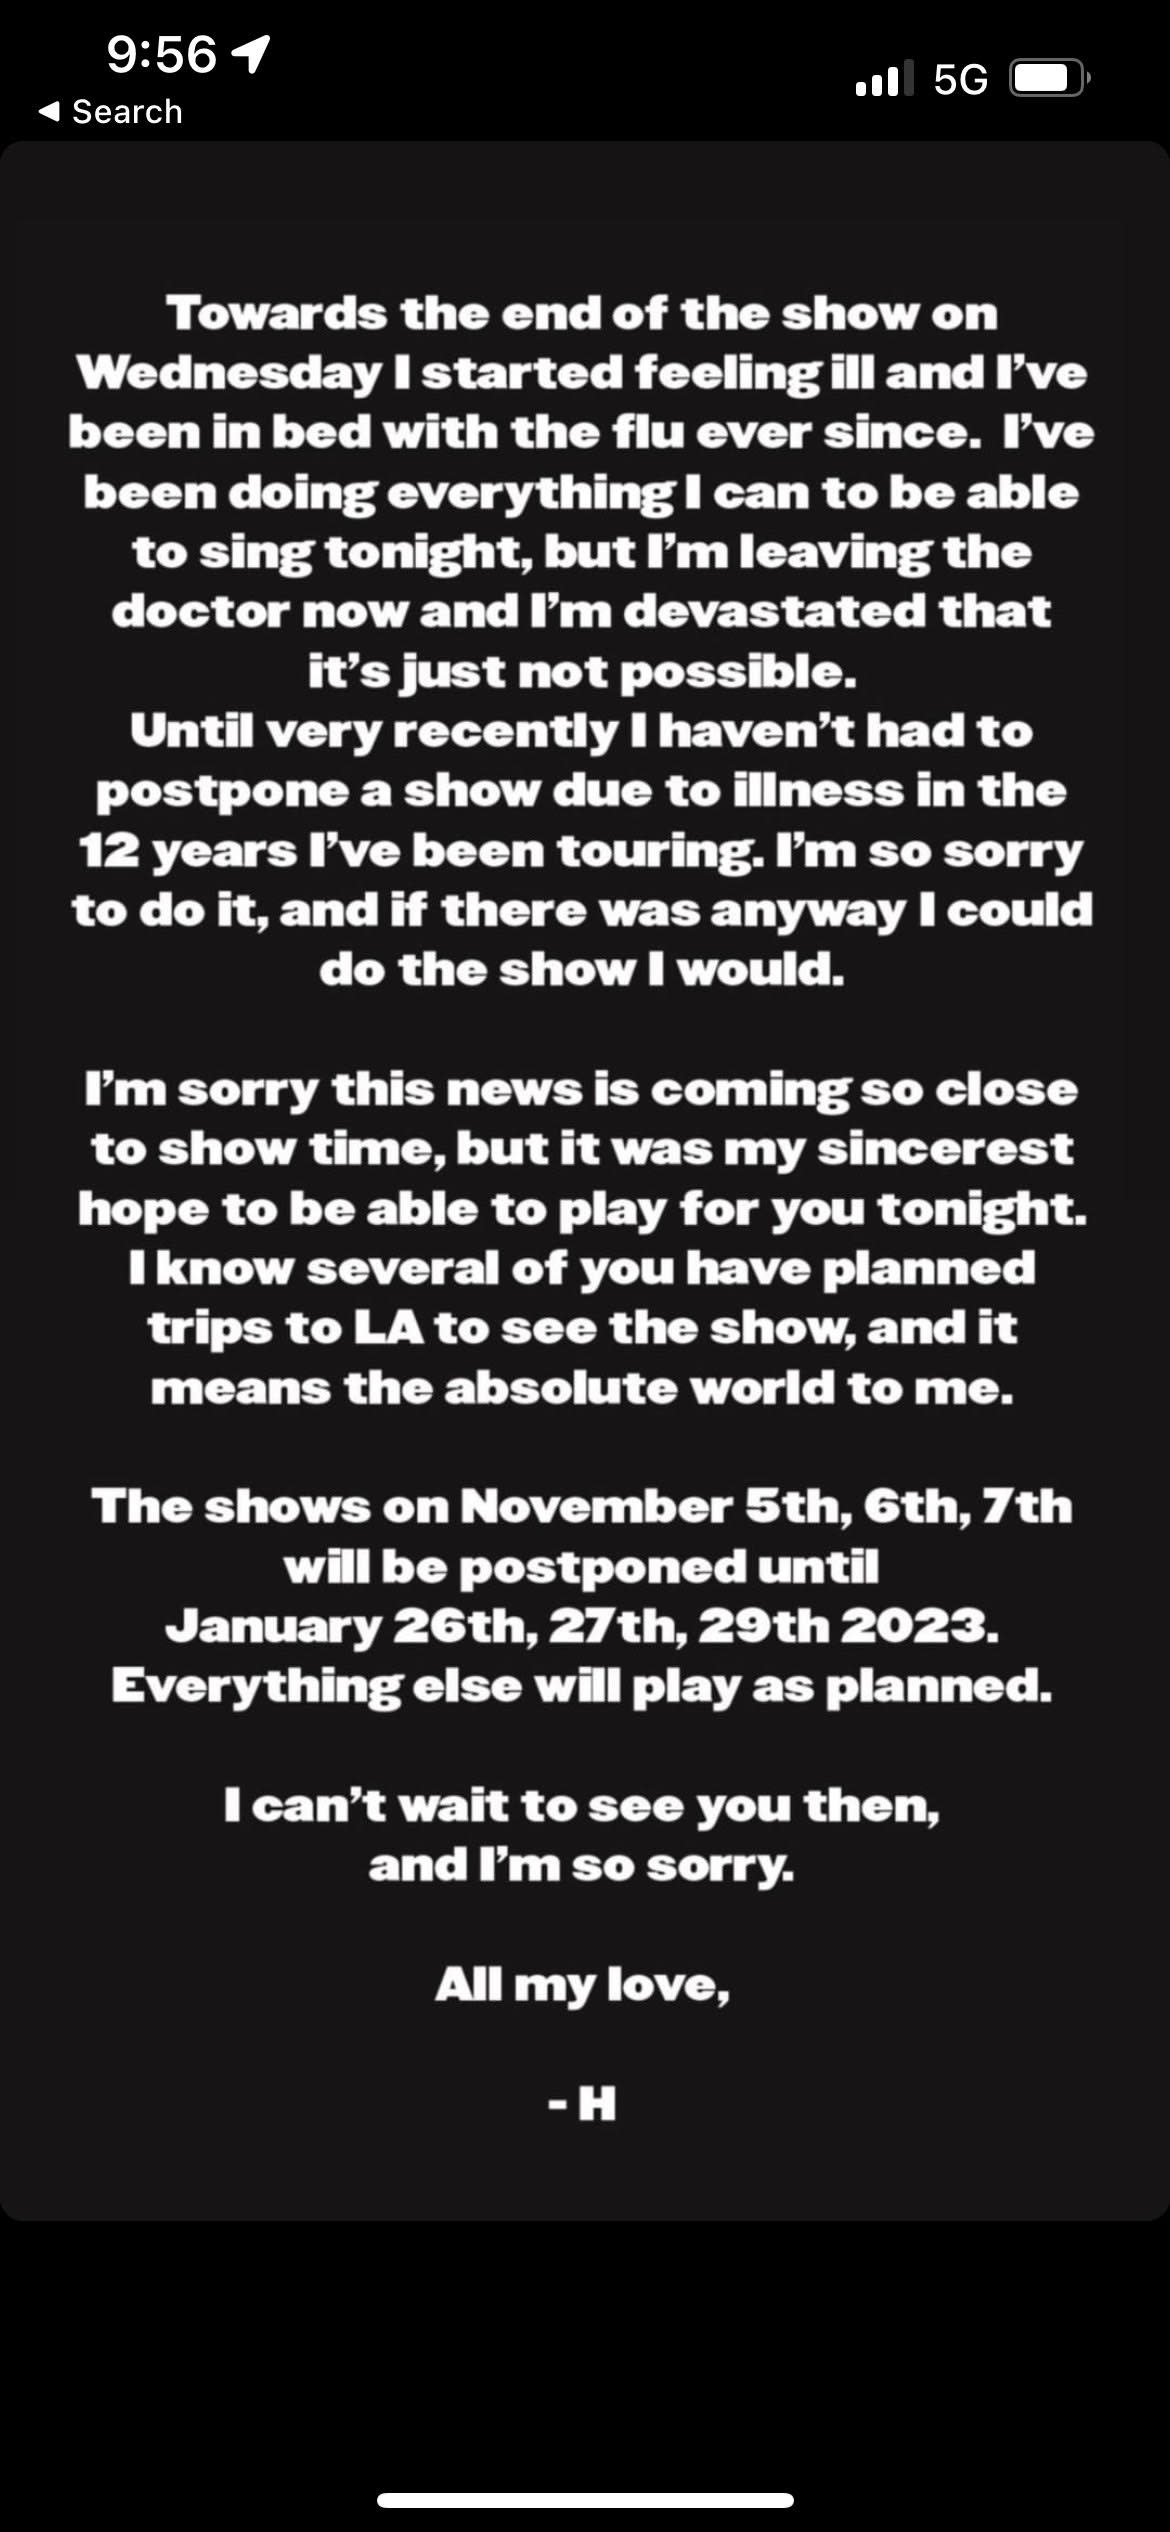 Harry Styles announces he will have to postpone his tour due to illness. (Instagram/Harry Styles)